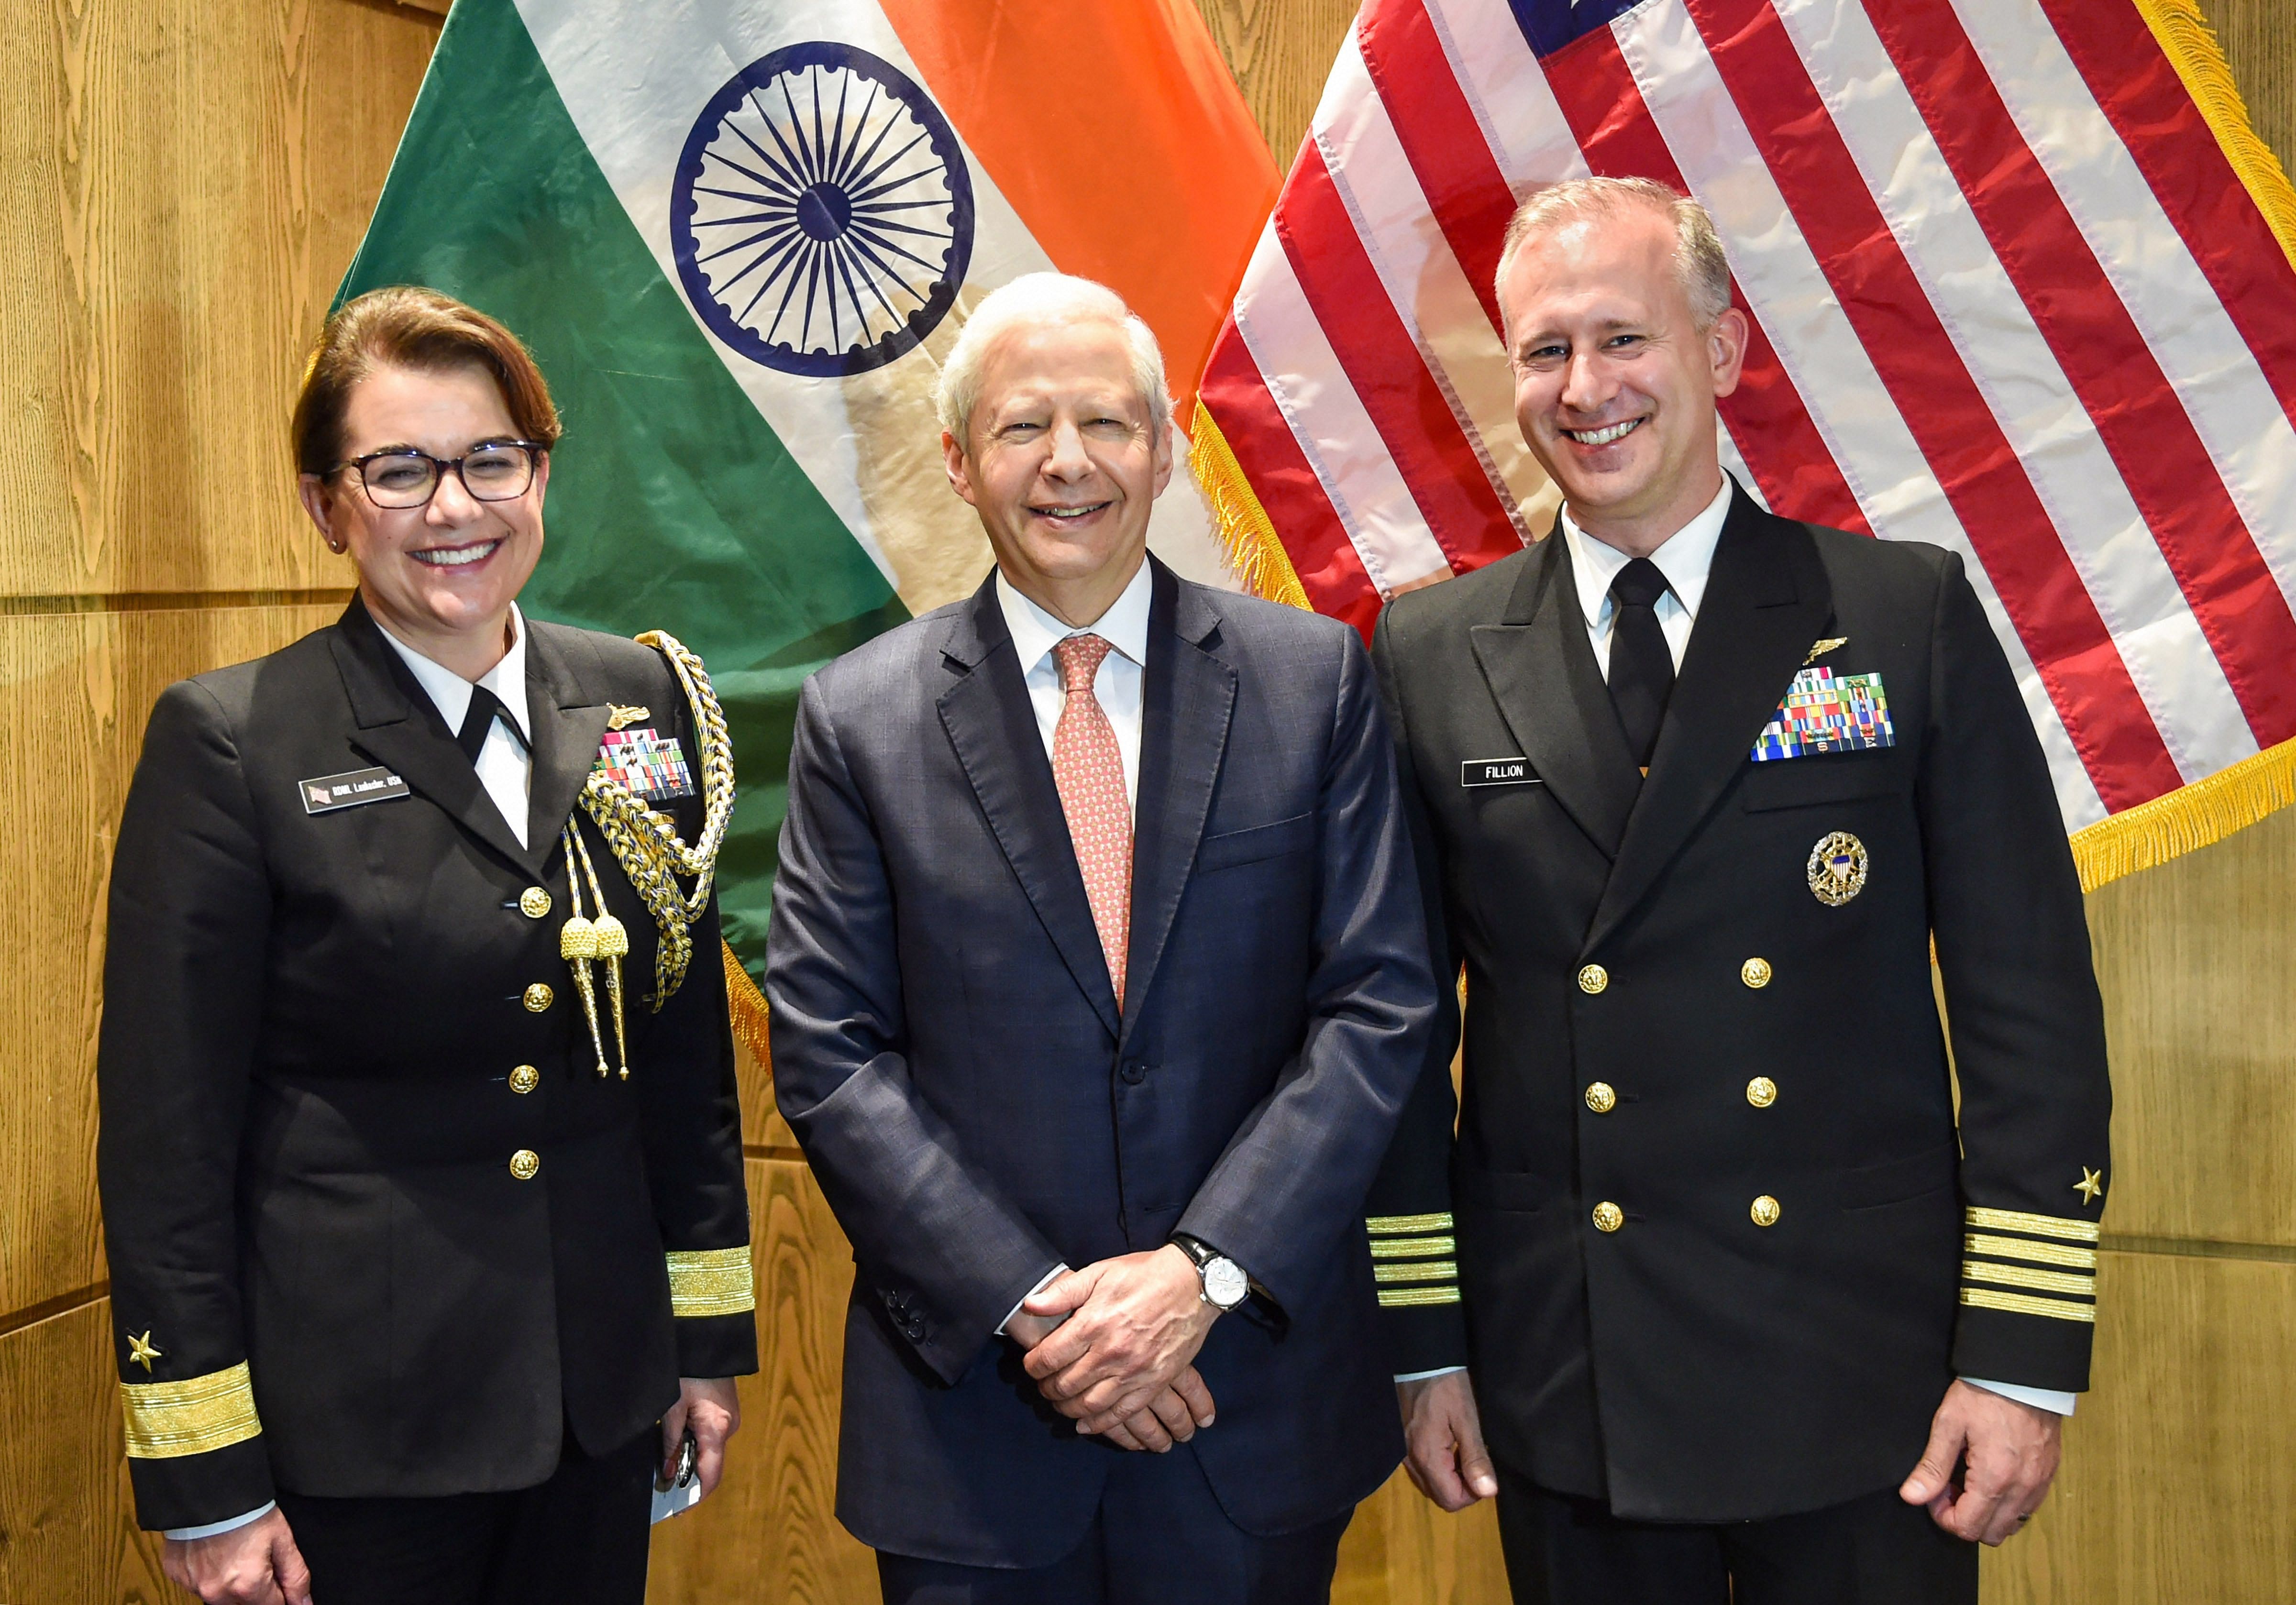 US Ambassador to India Kenneth Juster (c) Chief Office of Defence Cooperation, Captain Daniel E Fillion (R) and Rear Admiral Eileen H. Laubacher pose for photographs during a press conference, in Lucknow, Tuesday, Feb. 4, 2020. (Credit: PTI Photo)